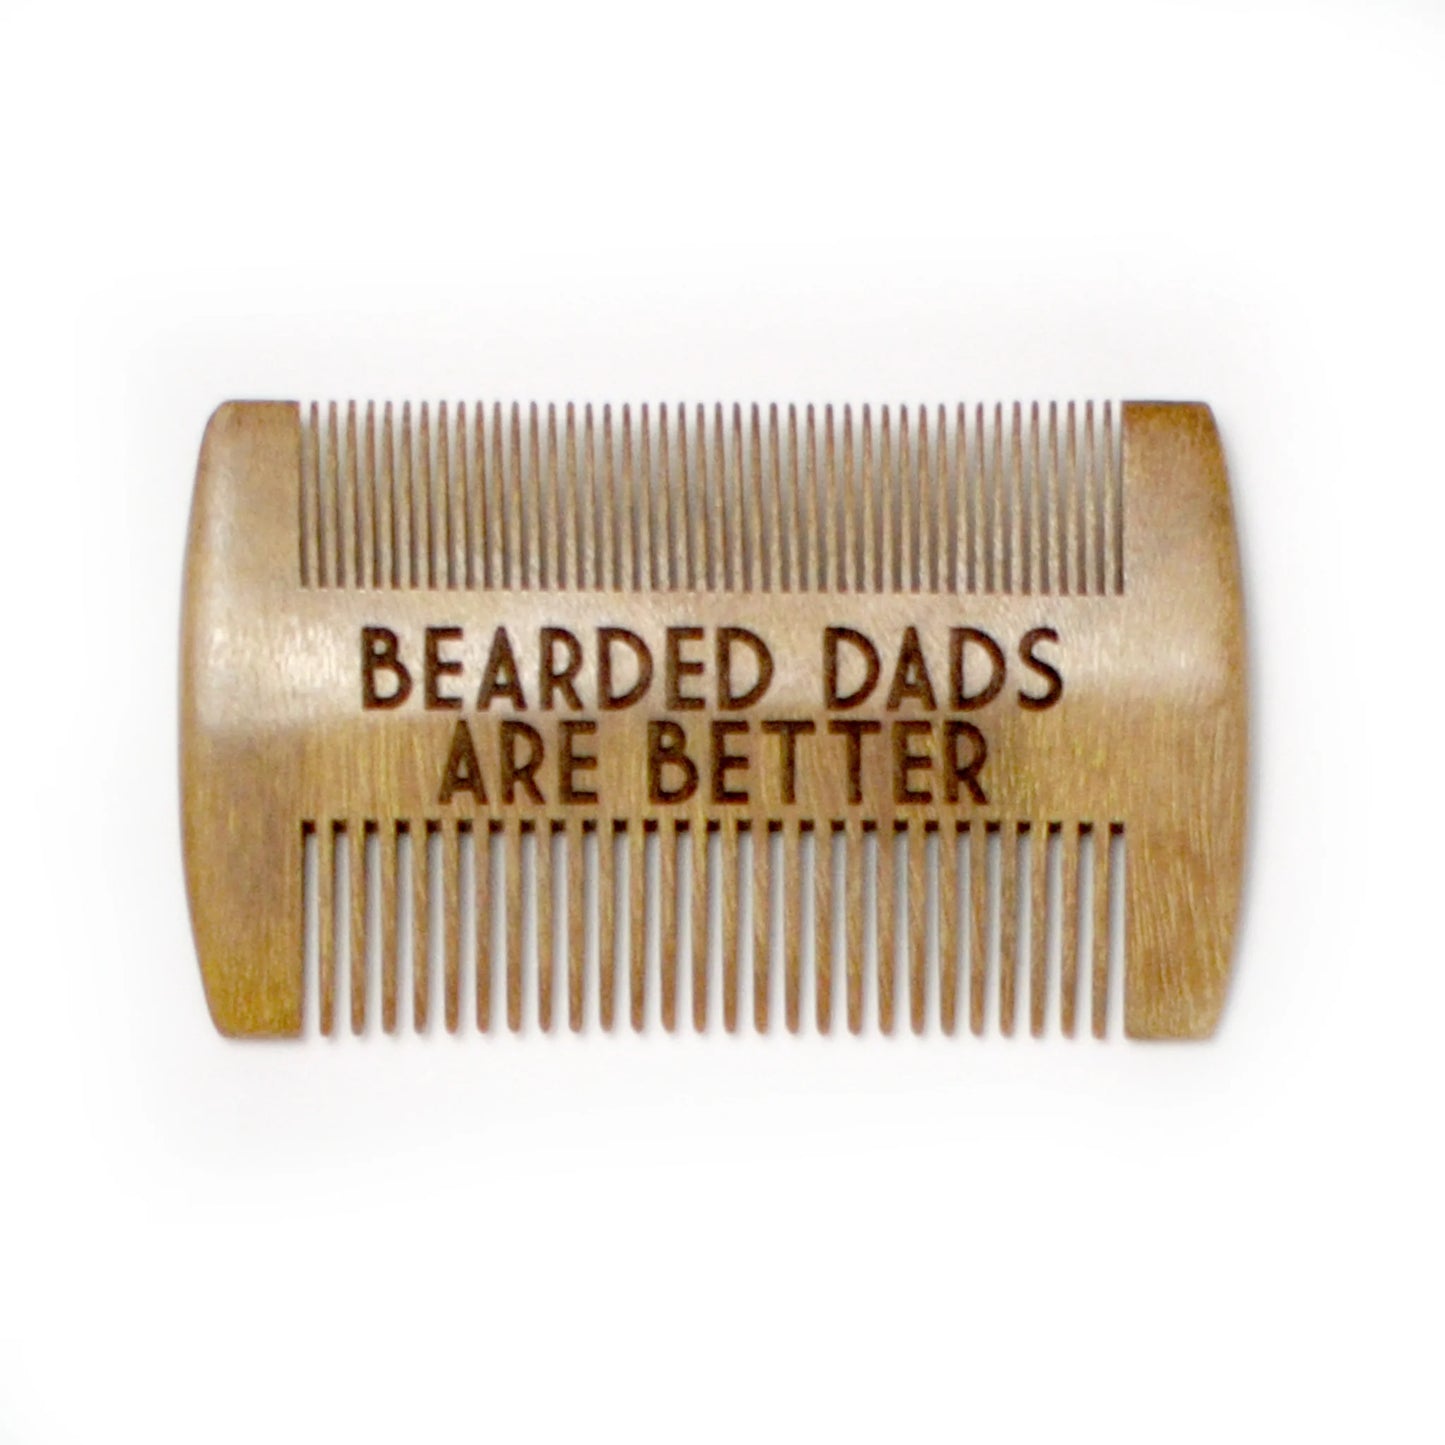 Bearded Dads Are Better - Beard Comb